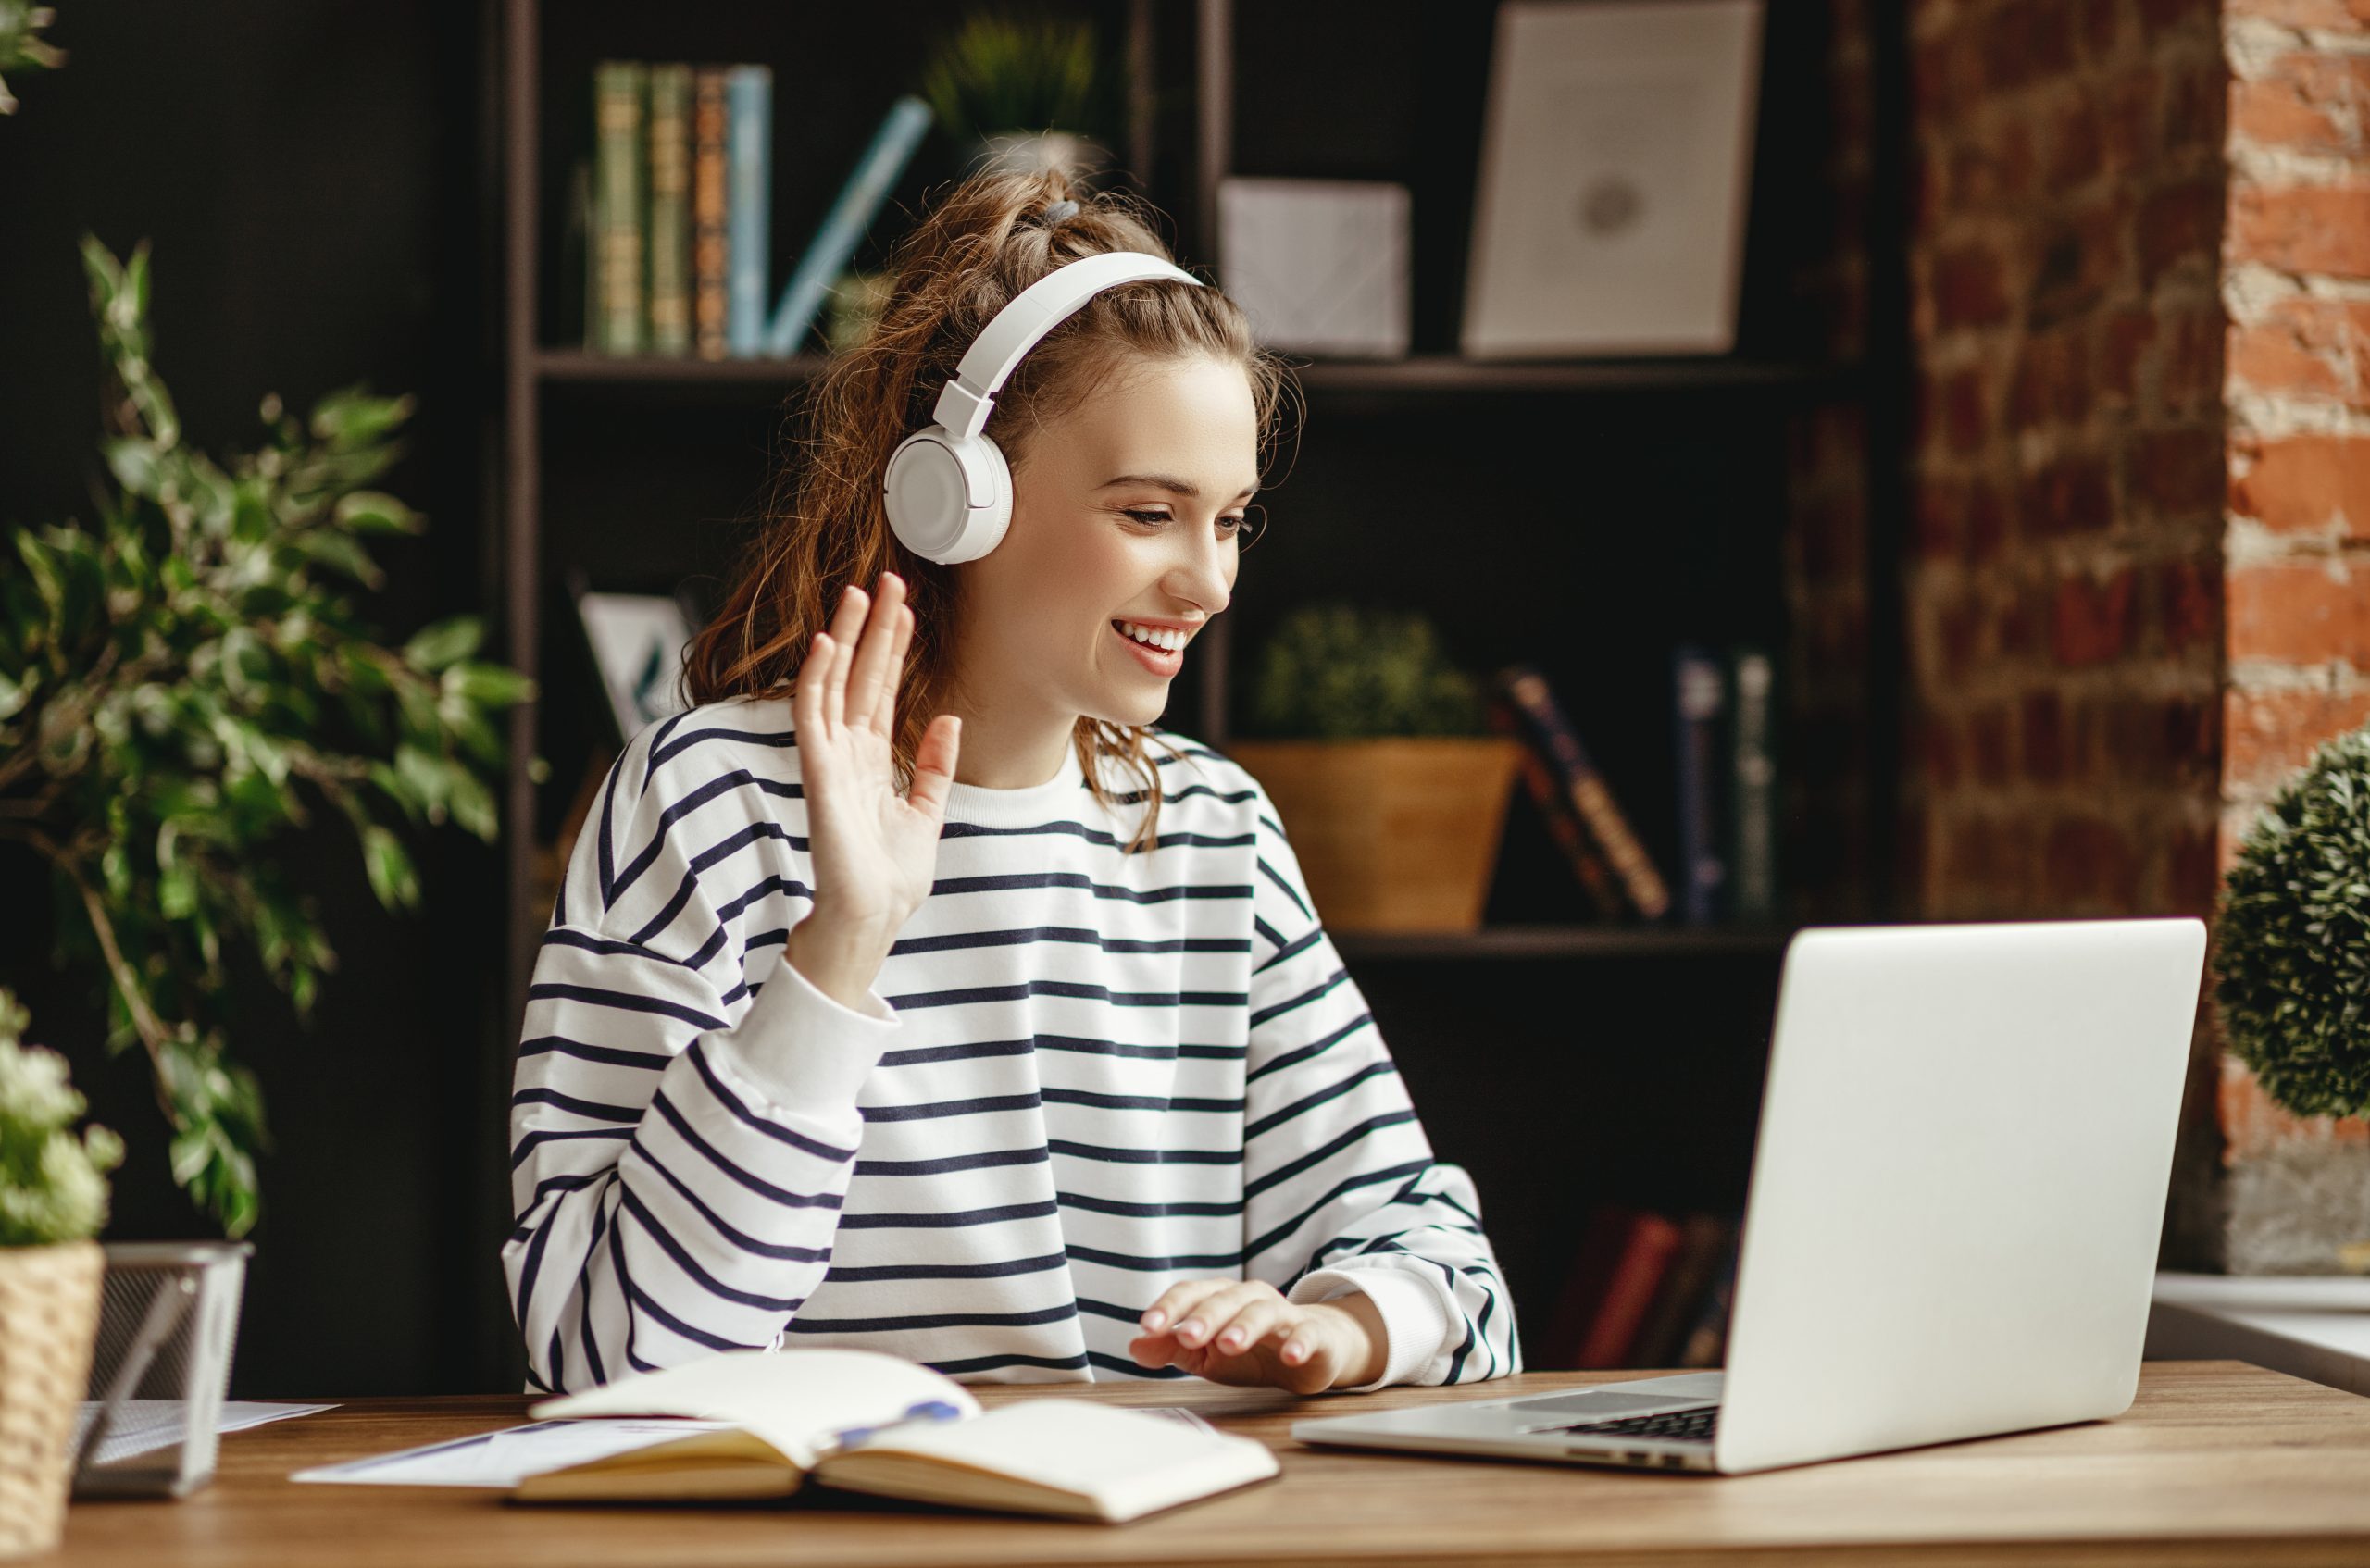 Joyful young female in wireless headphones waving wand greeting to screen while sitting at table and having video chat with business partners using laptop against blurred dark interior of comfortable loft office